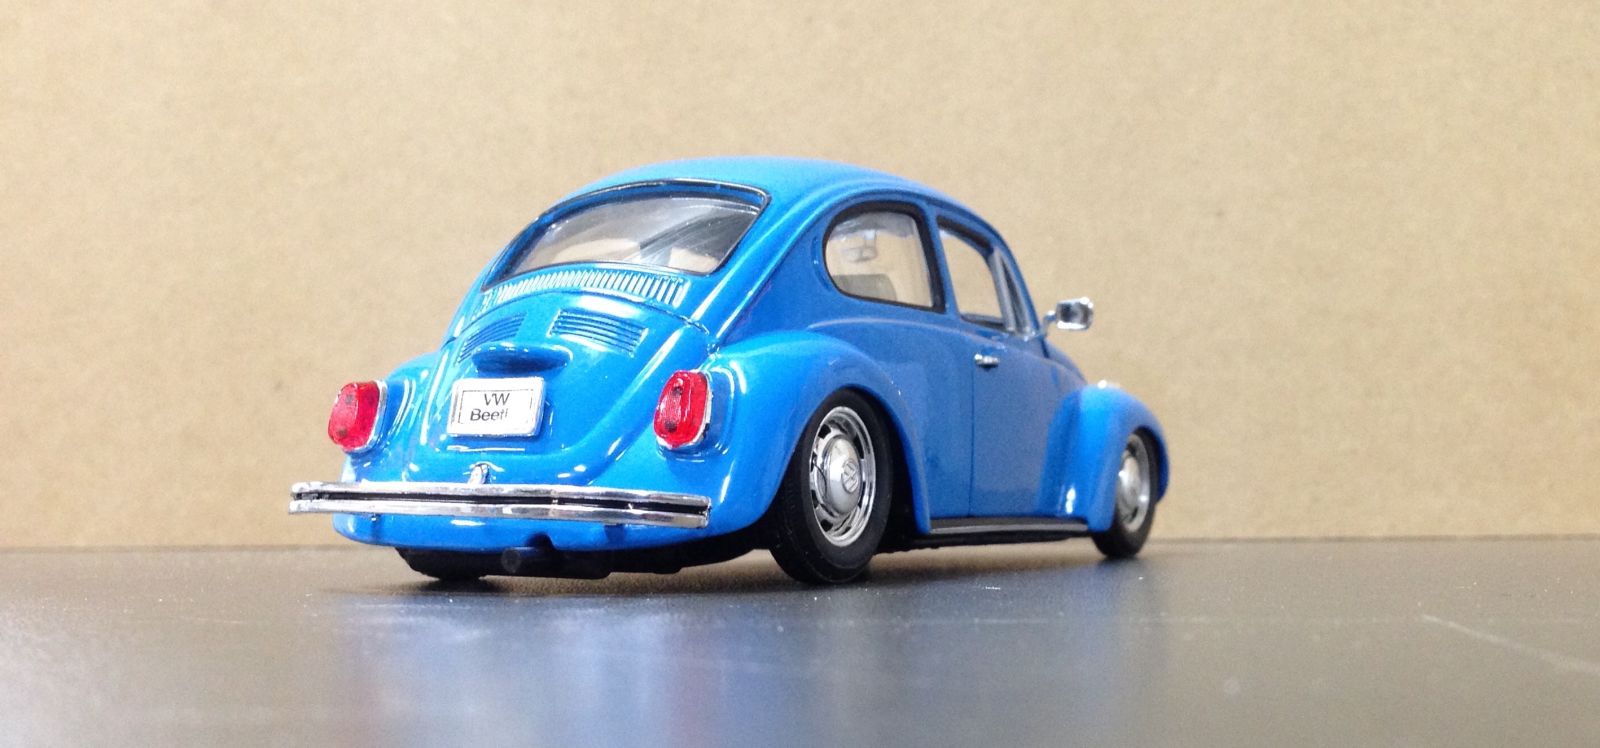 Illustration for article titled Welly MODel kit, 70s Beetle